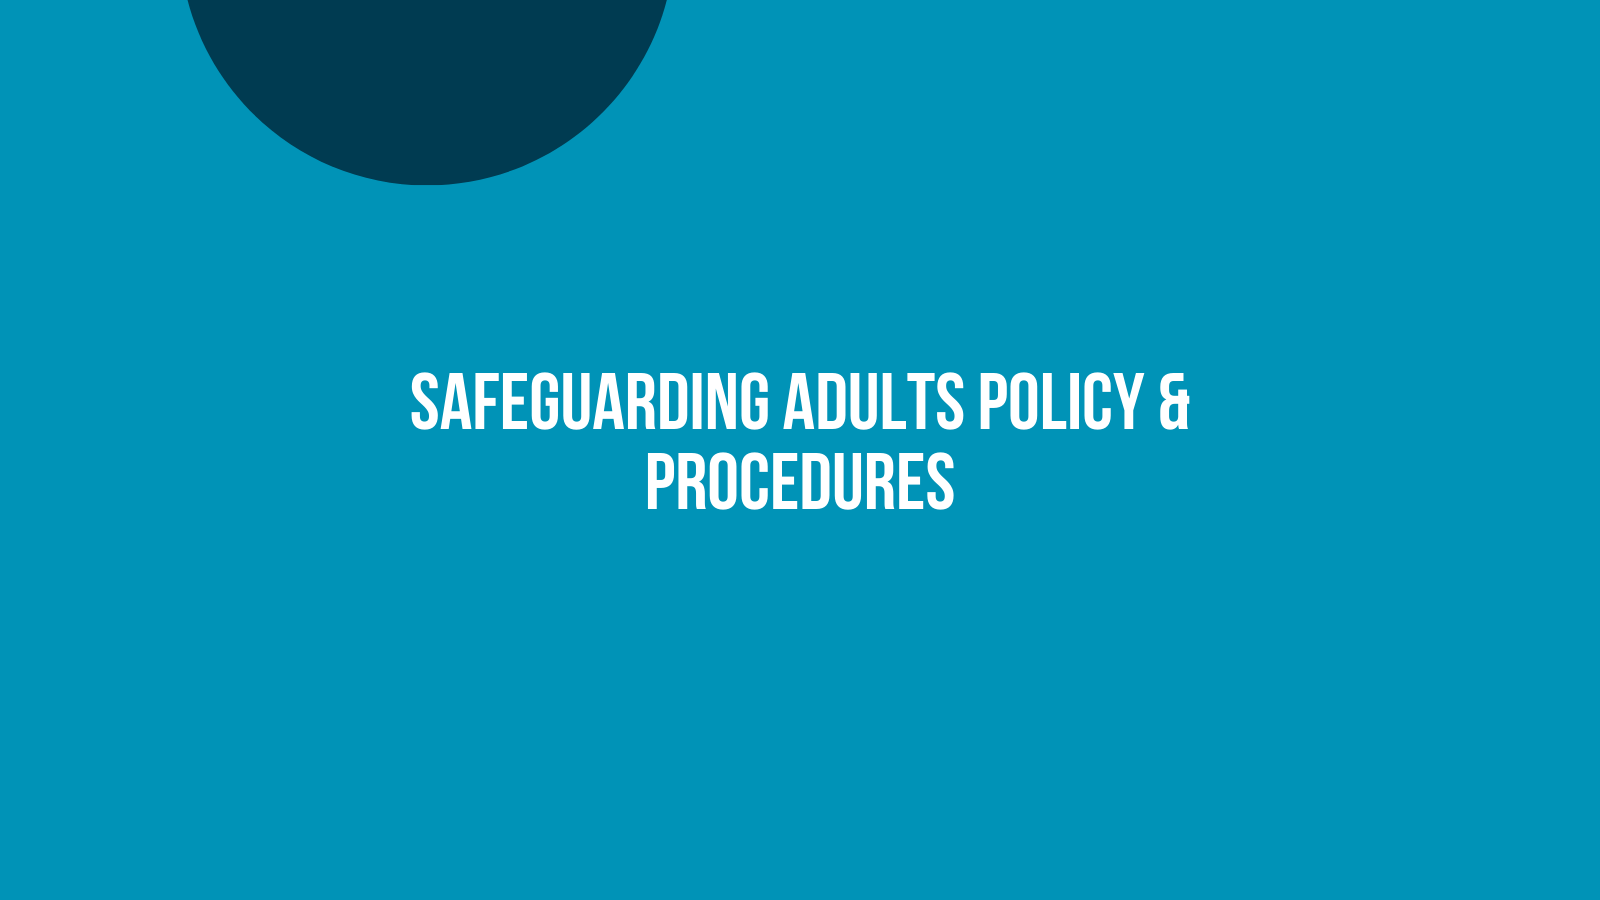 Safeguarding Adults Policy & Procedures